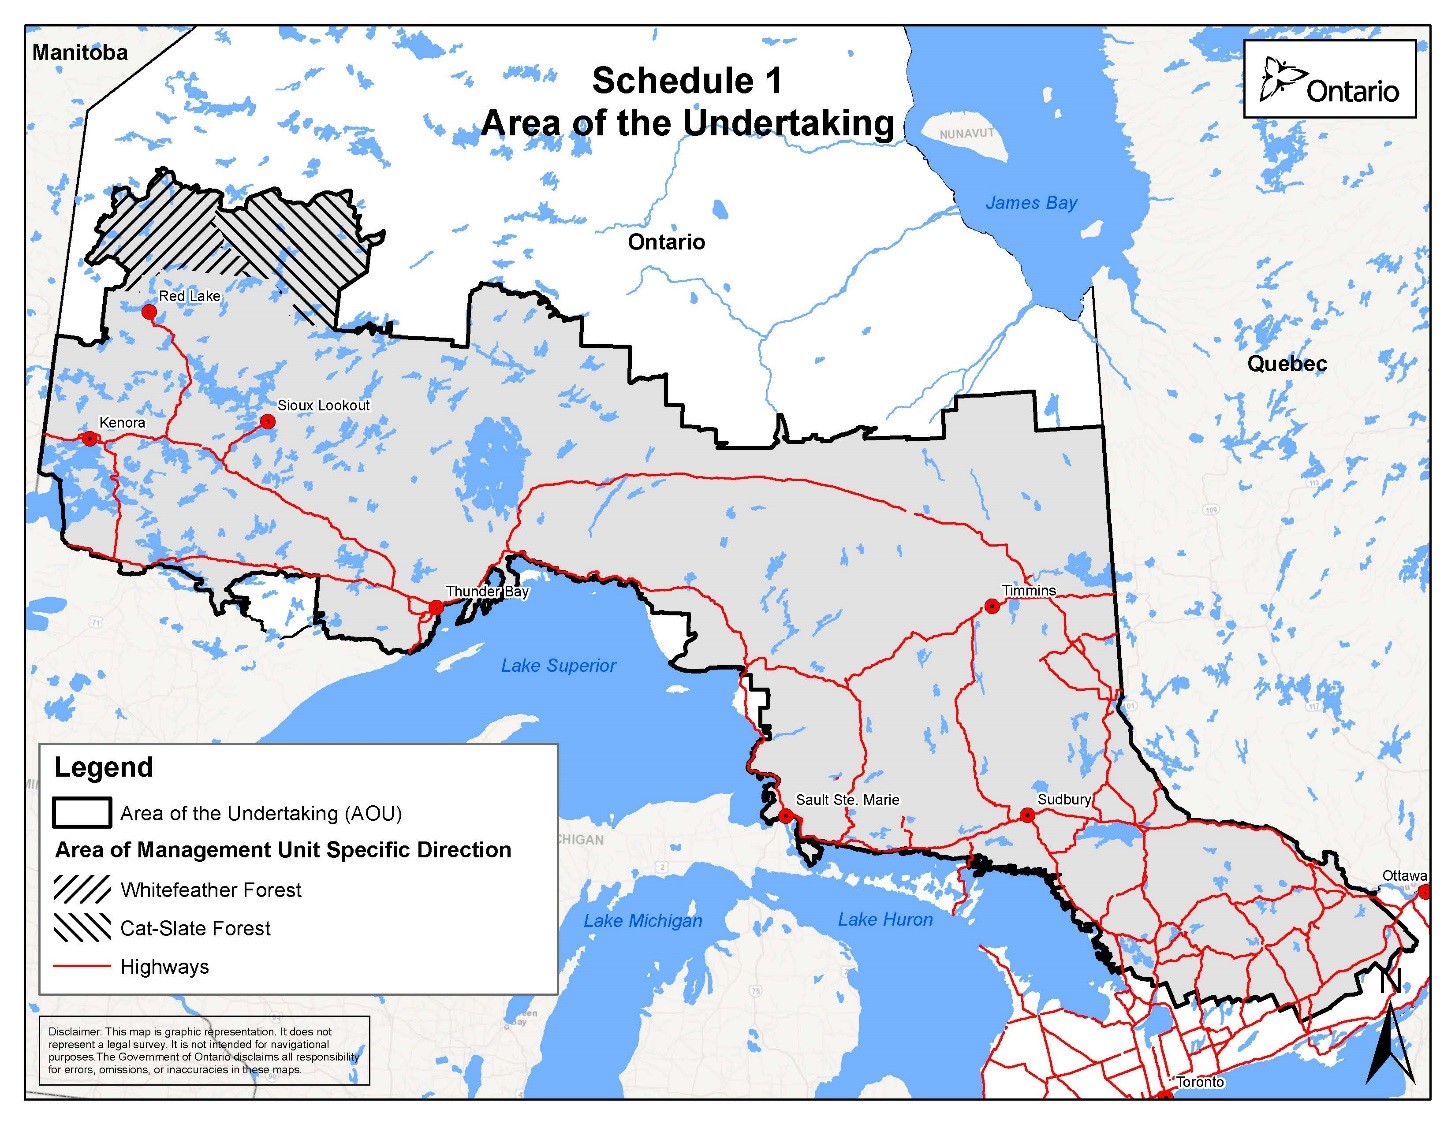 Schedule 1 - Area of Undertaking - Whitefeather Forest and Cat-Slate Forest are indicated by shaded areas